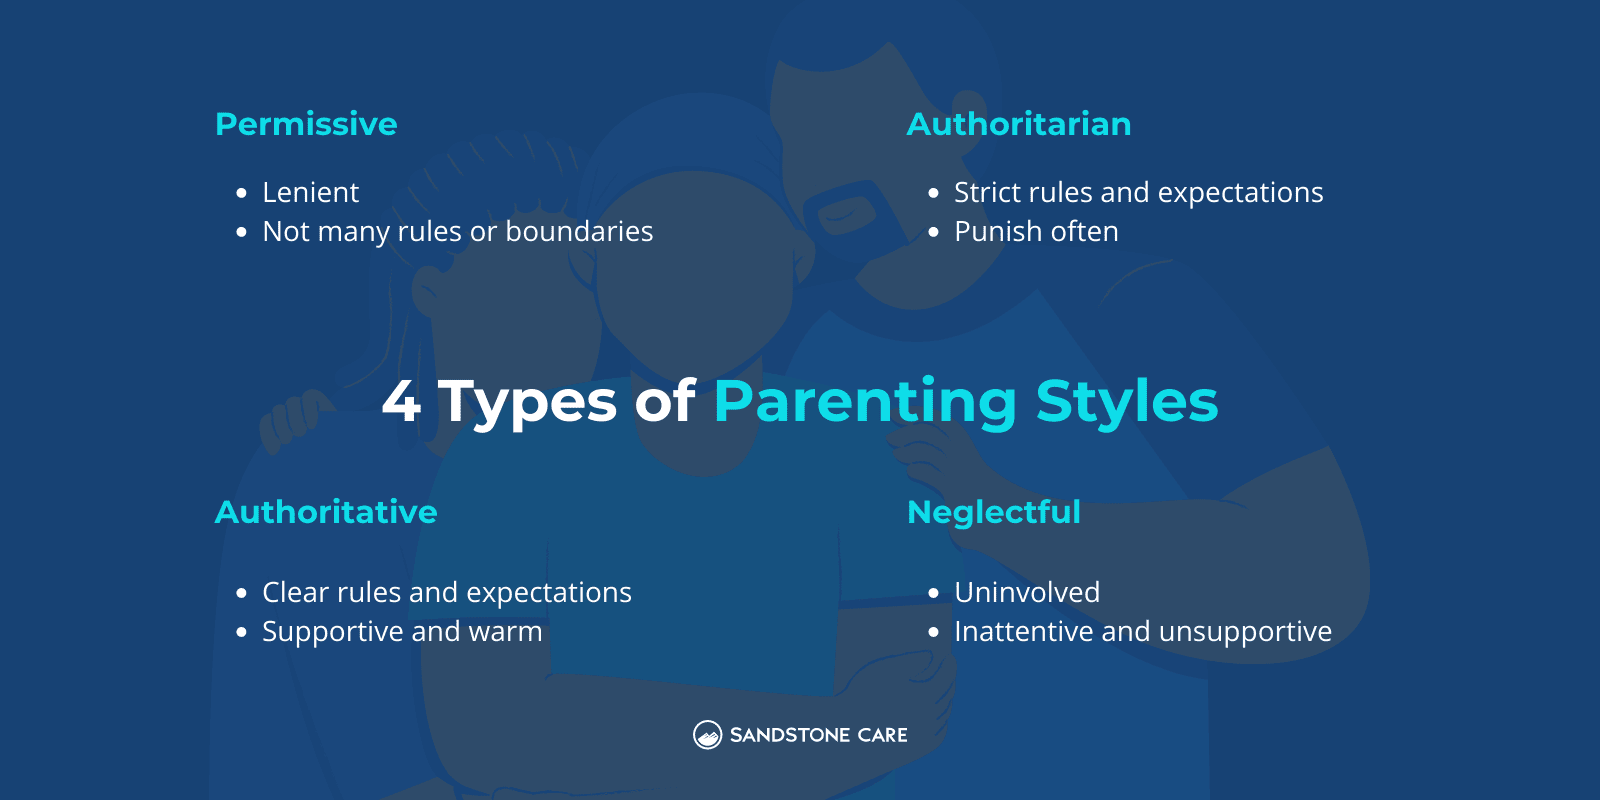 4 types of Parenting Styles Infographic